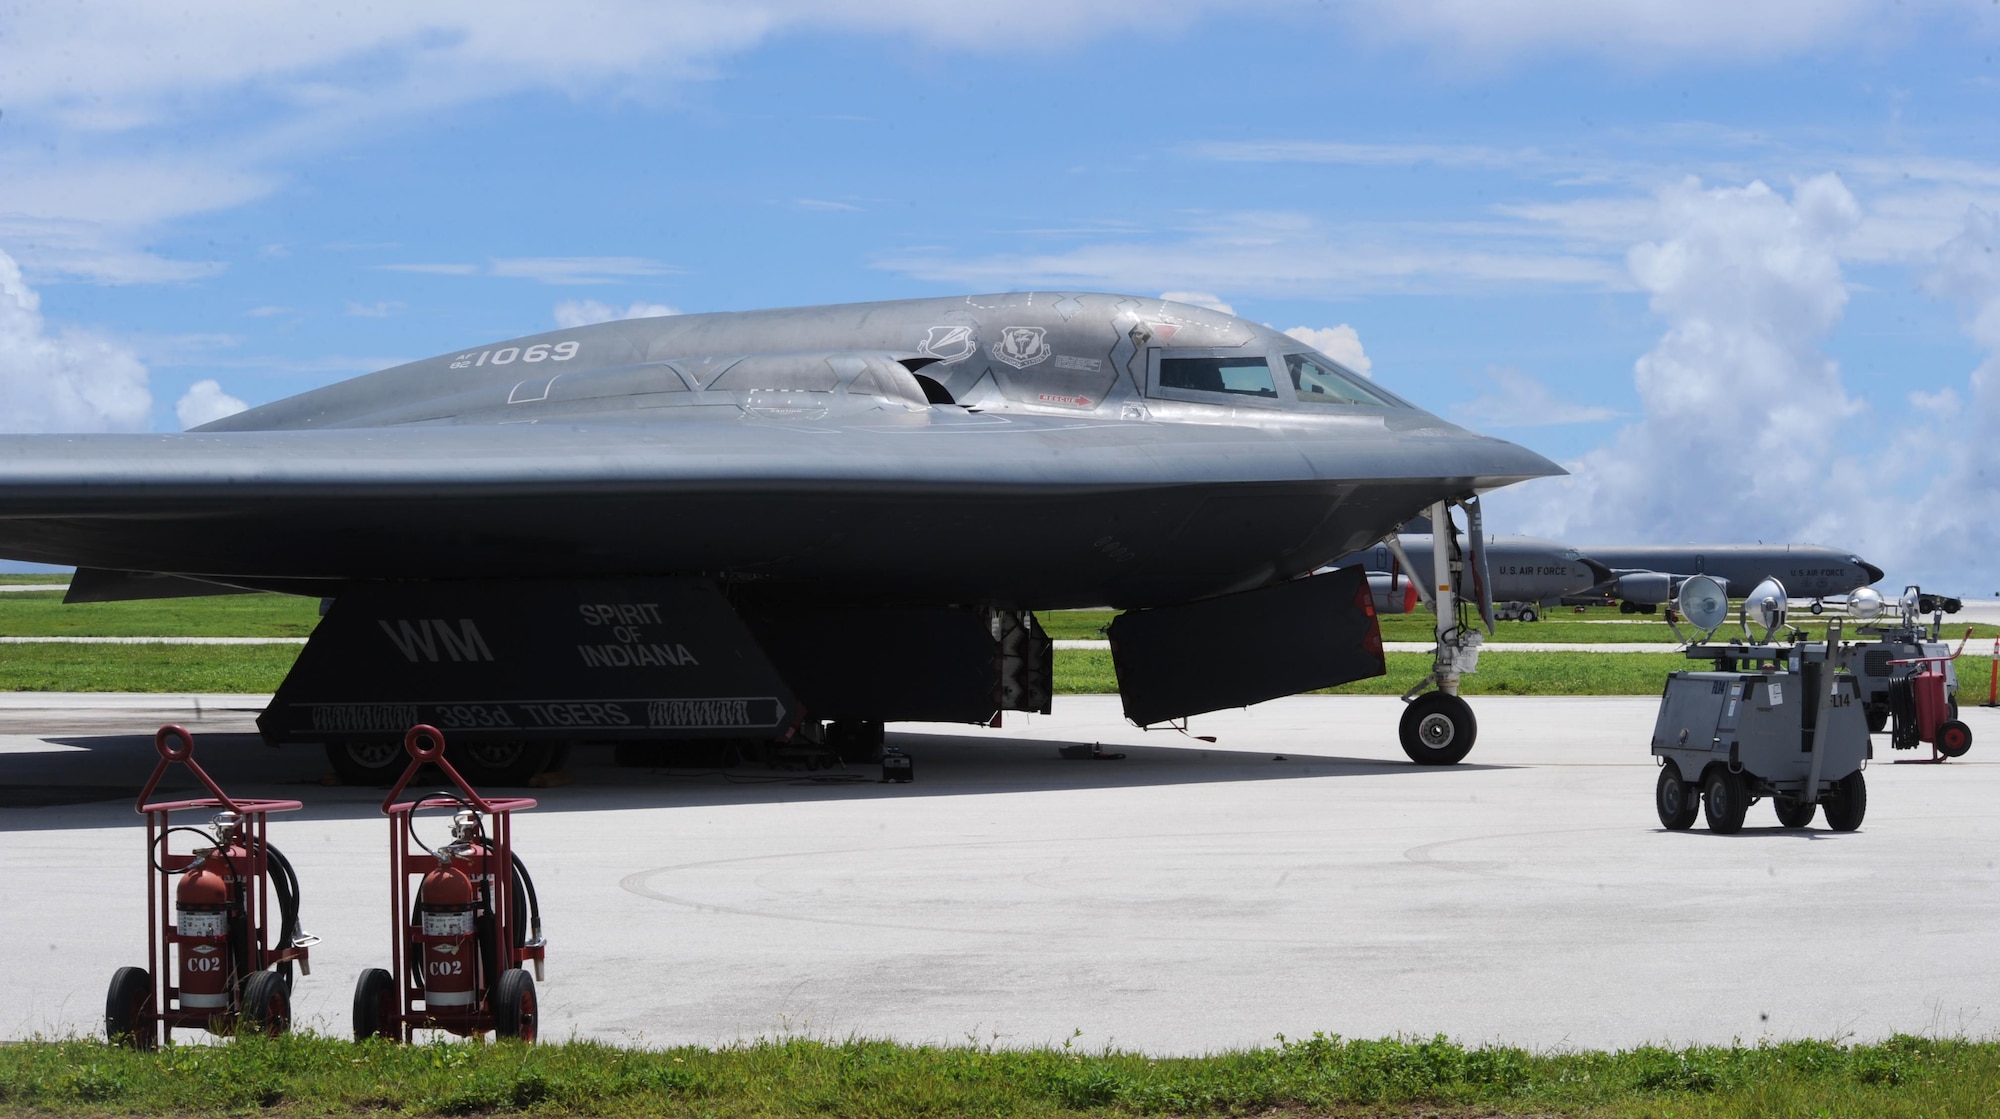 A U.S. Air Force B-2 Spirit deployed from Whiteman Air Force Base, Mo., sits on the parkway at Andersen Air Force Base, Guam, Aug. 10, 2016. More than 200 Airmen and three B-2s deployed from Whiteman supporting bomber operations providing a visible demonstration of the U.S. ability to project power globally and respond to any potential crisis or challenge. (U.S. Air Force photo by Tech. Sgt. Miguel Lara III)